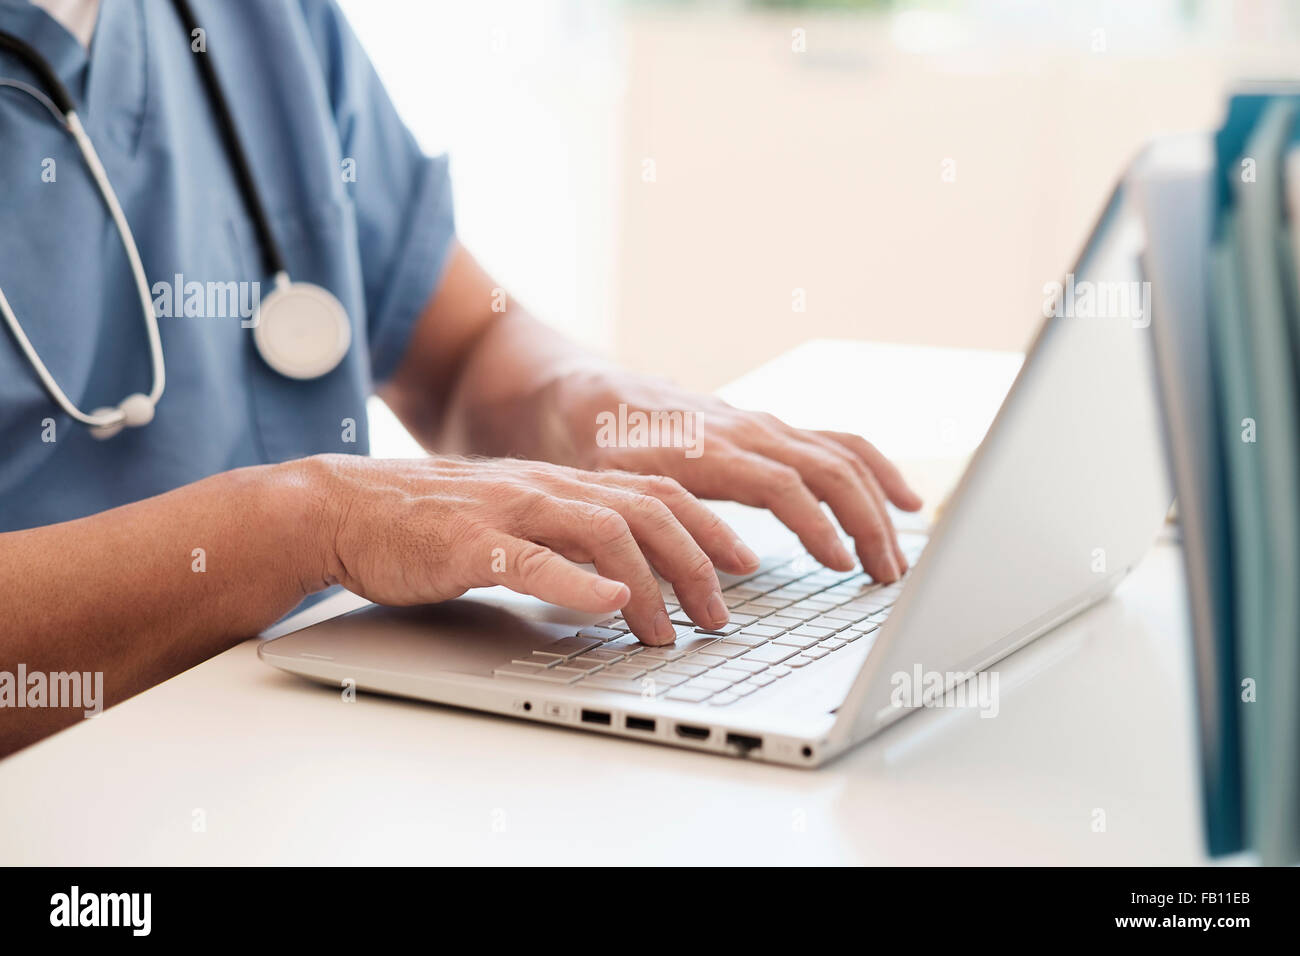 Man using laptop in scrubs Banque D'Images